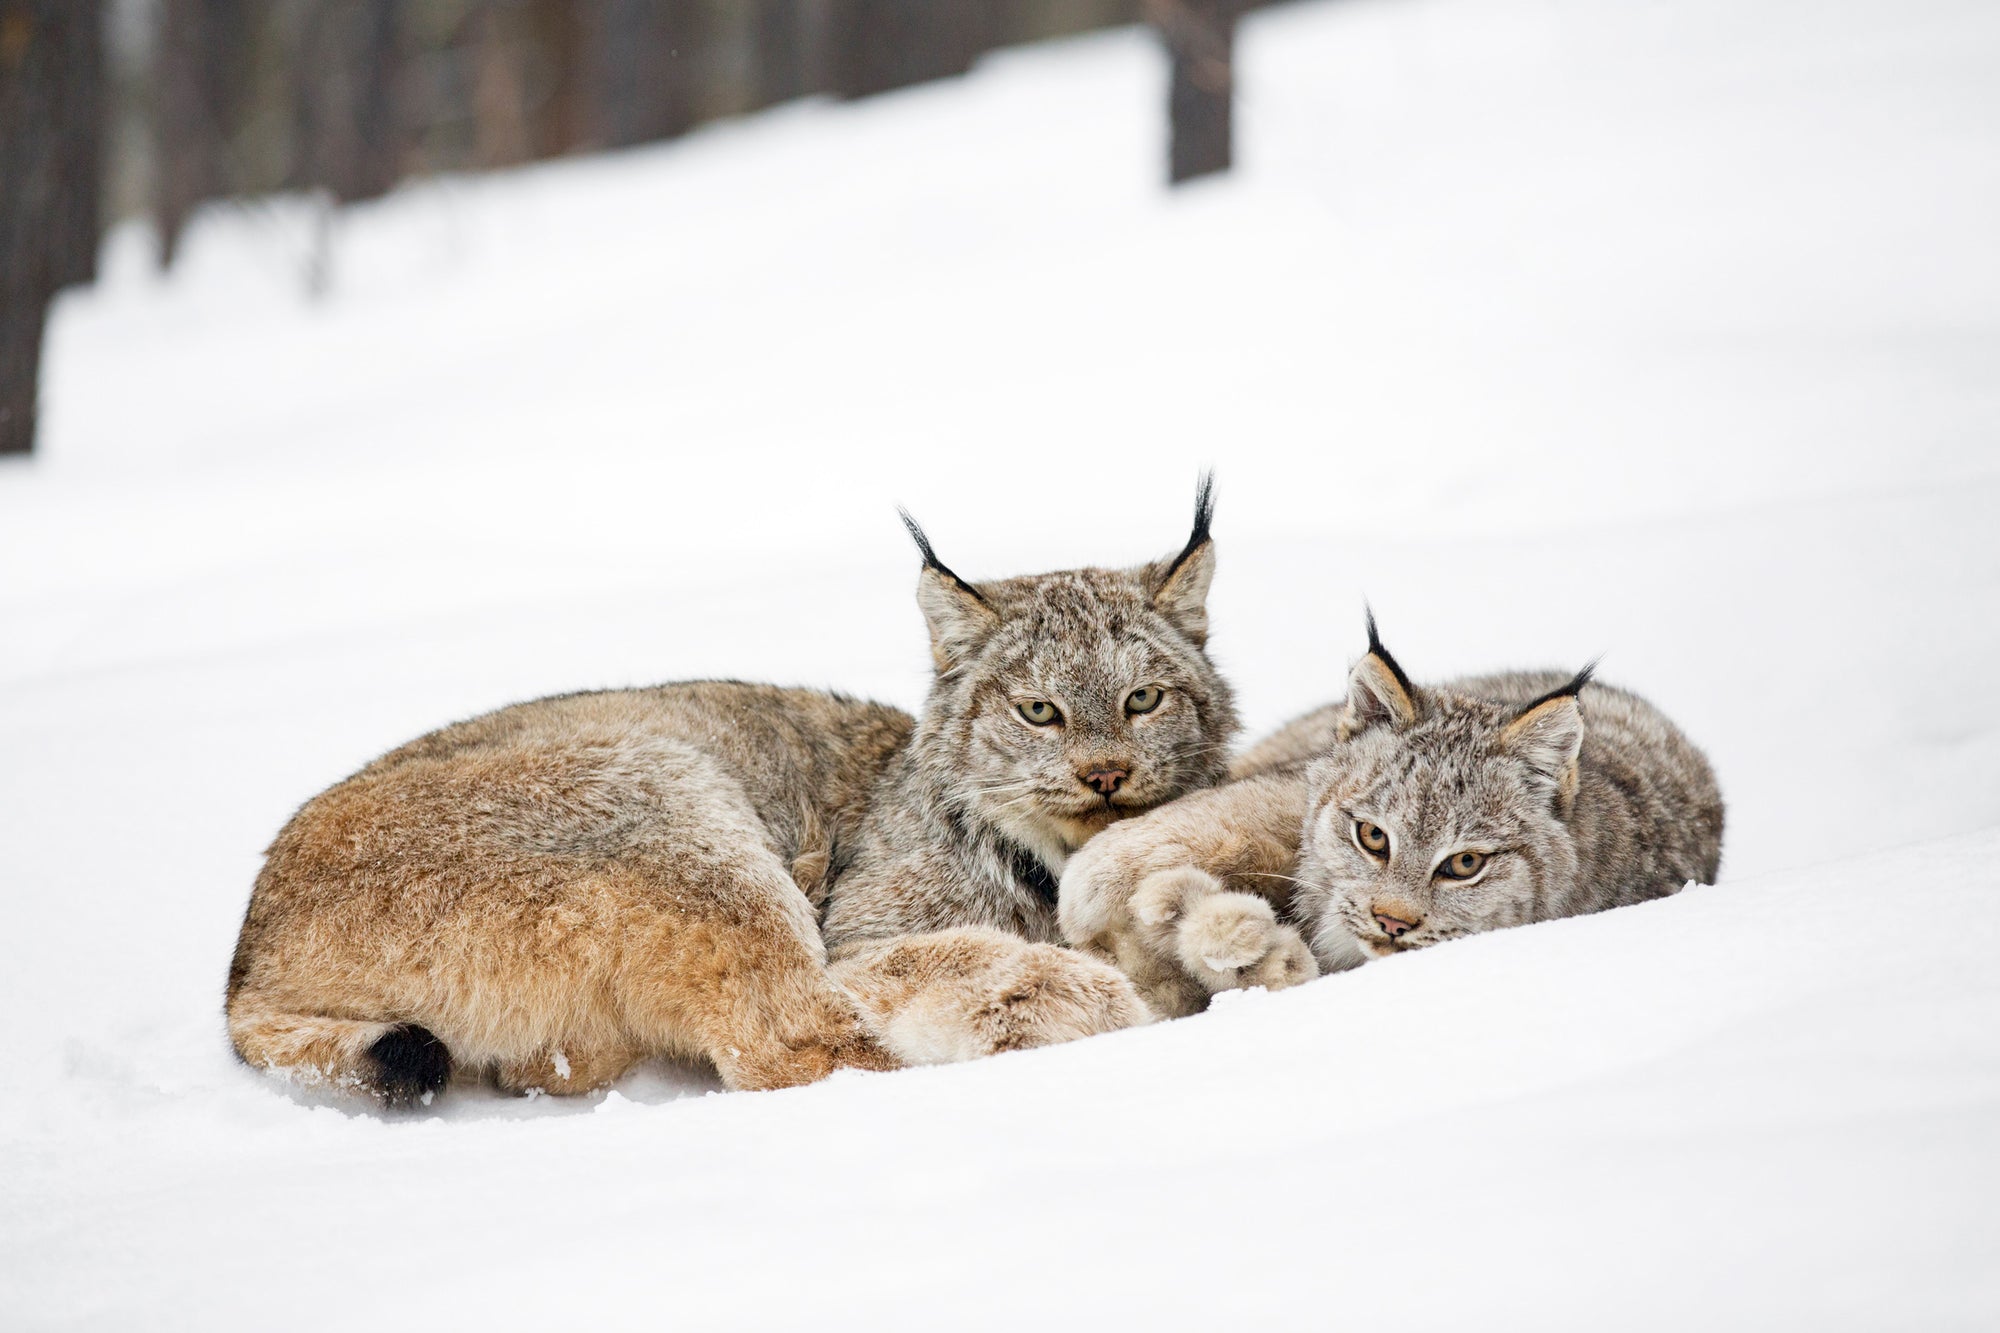 Two lynx curled up in the snow. End of image description.